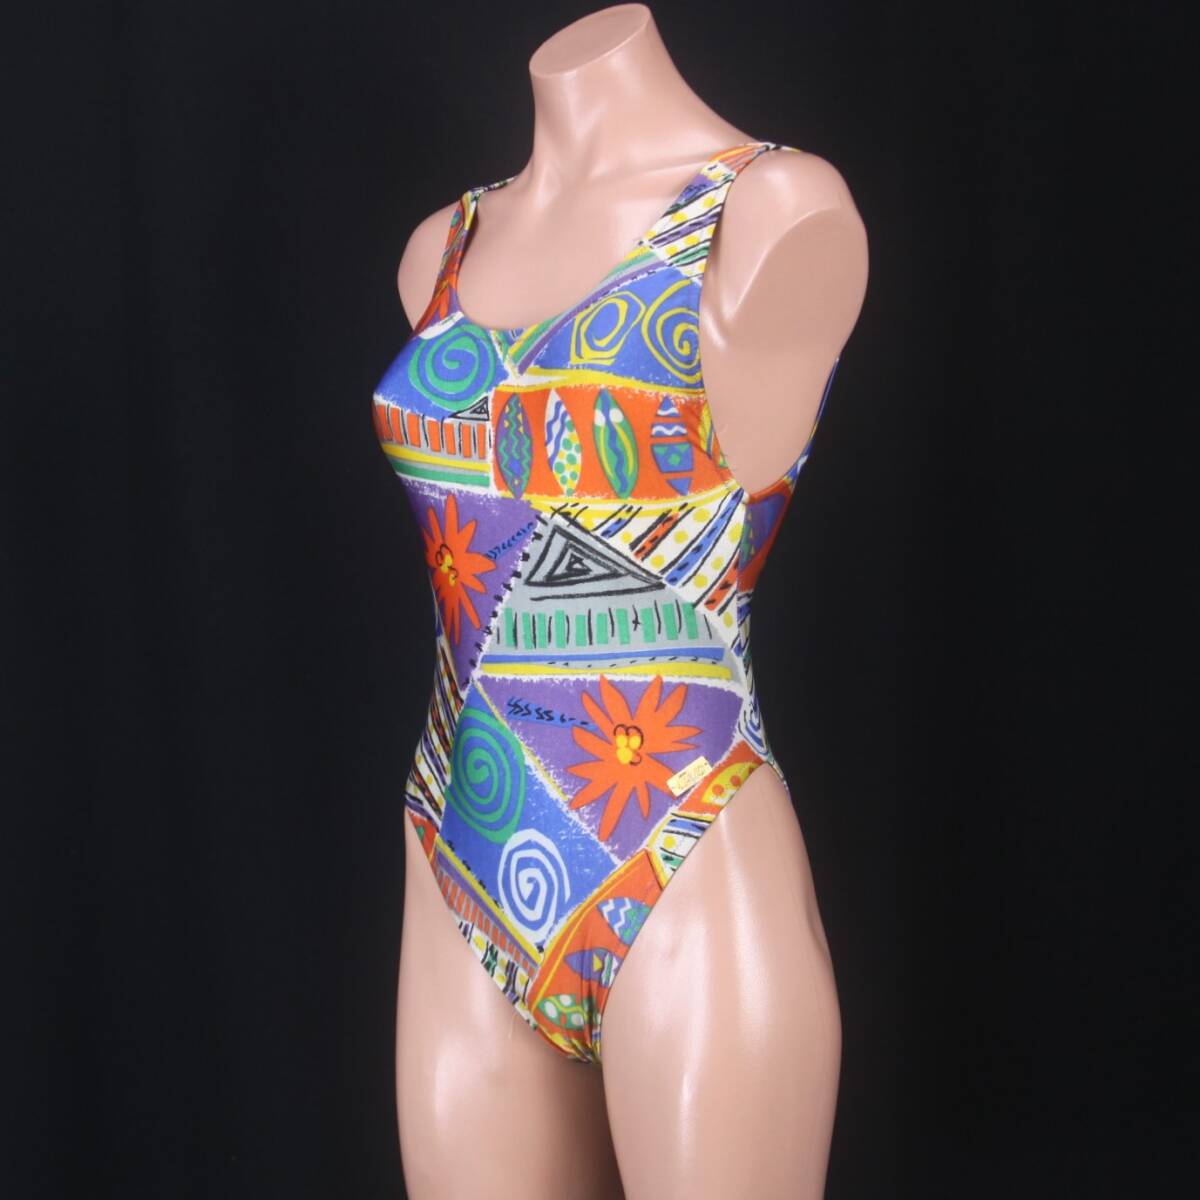 C0456*1 jpy ~ with translation lady's swimsuit high leg JAVIC stylish retro pattern pattern ....S size One-piece beach pool sea costume play clothes 